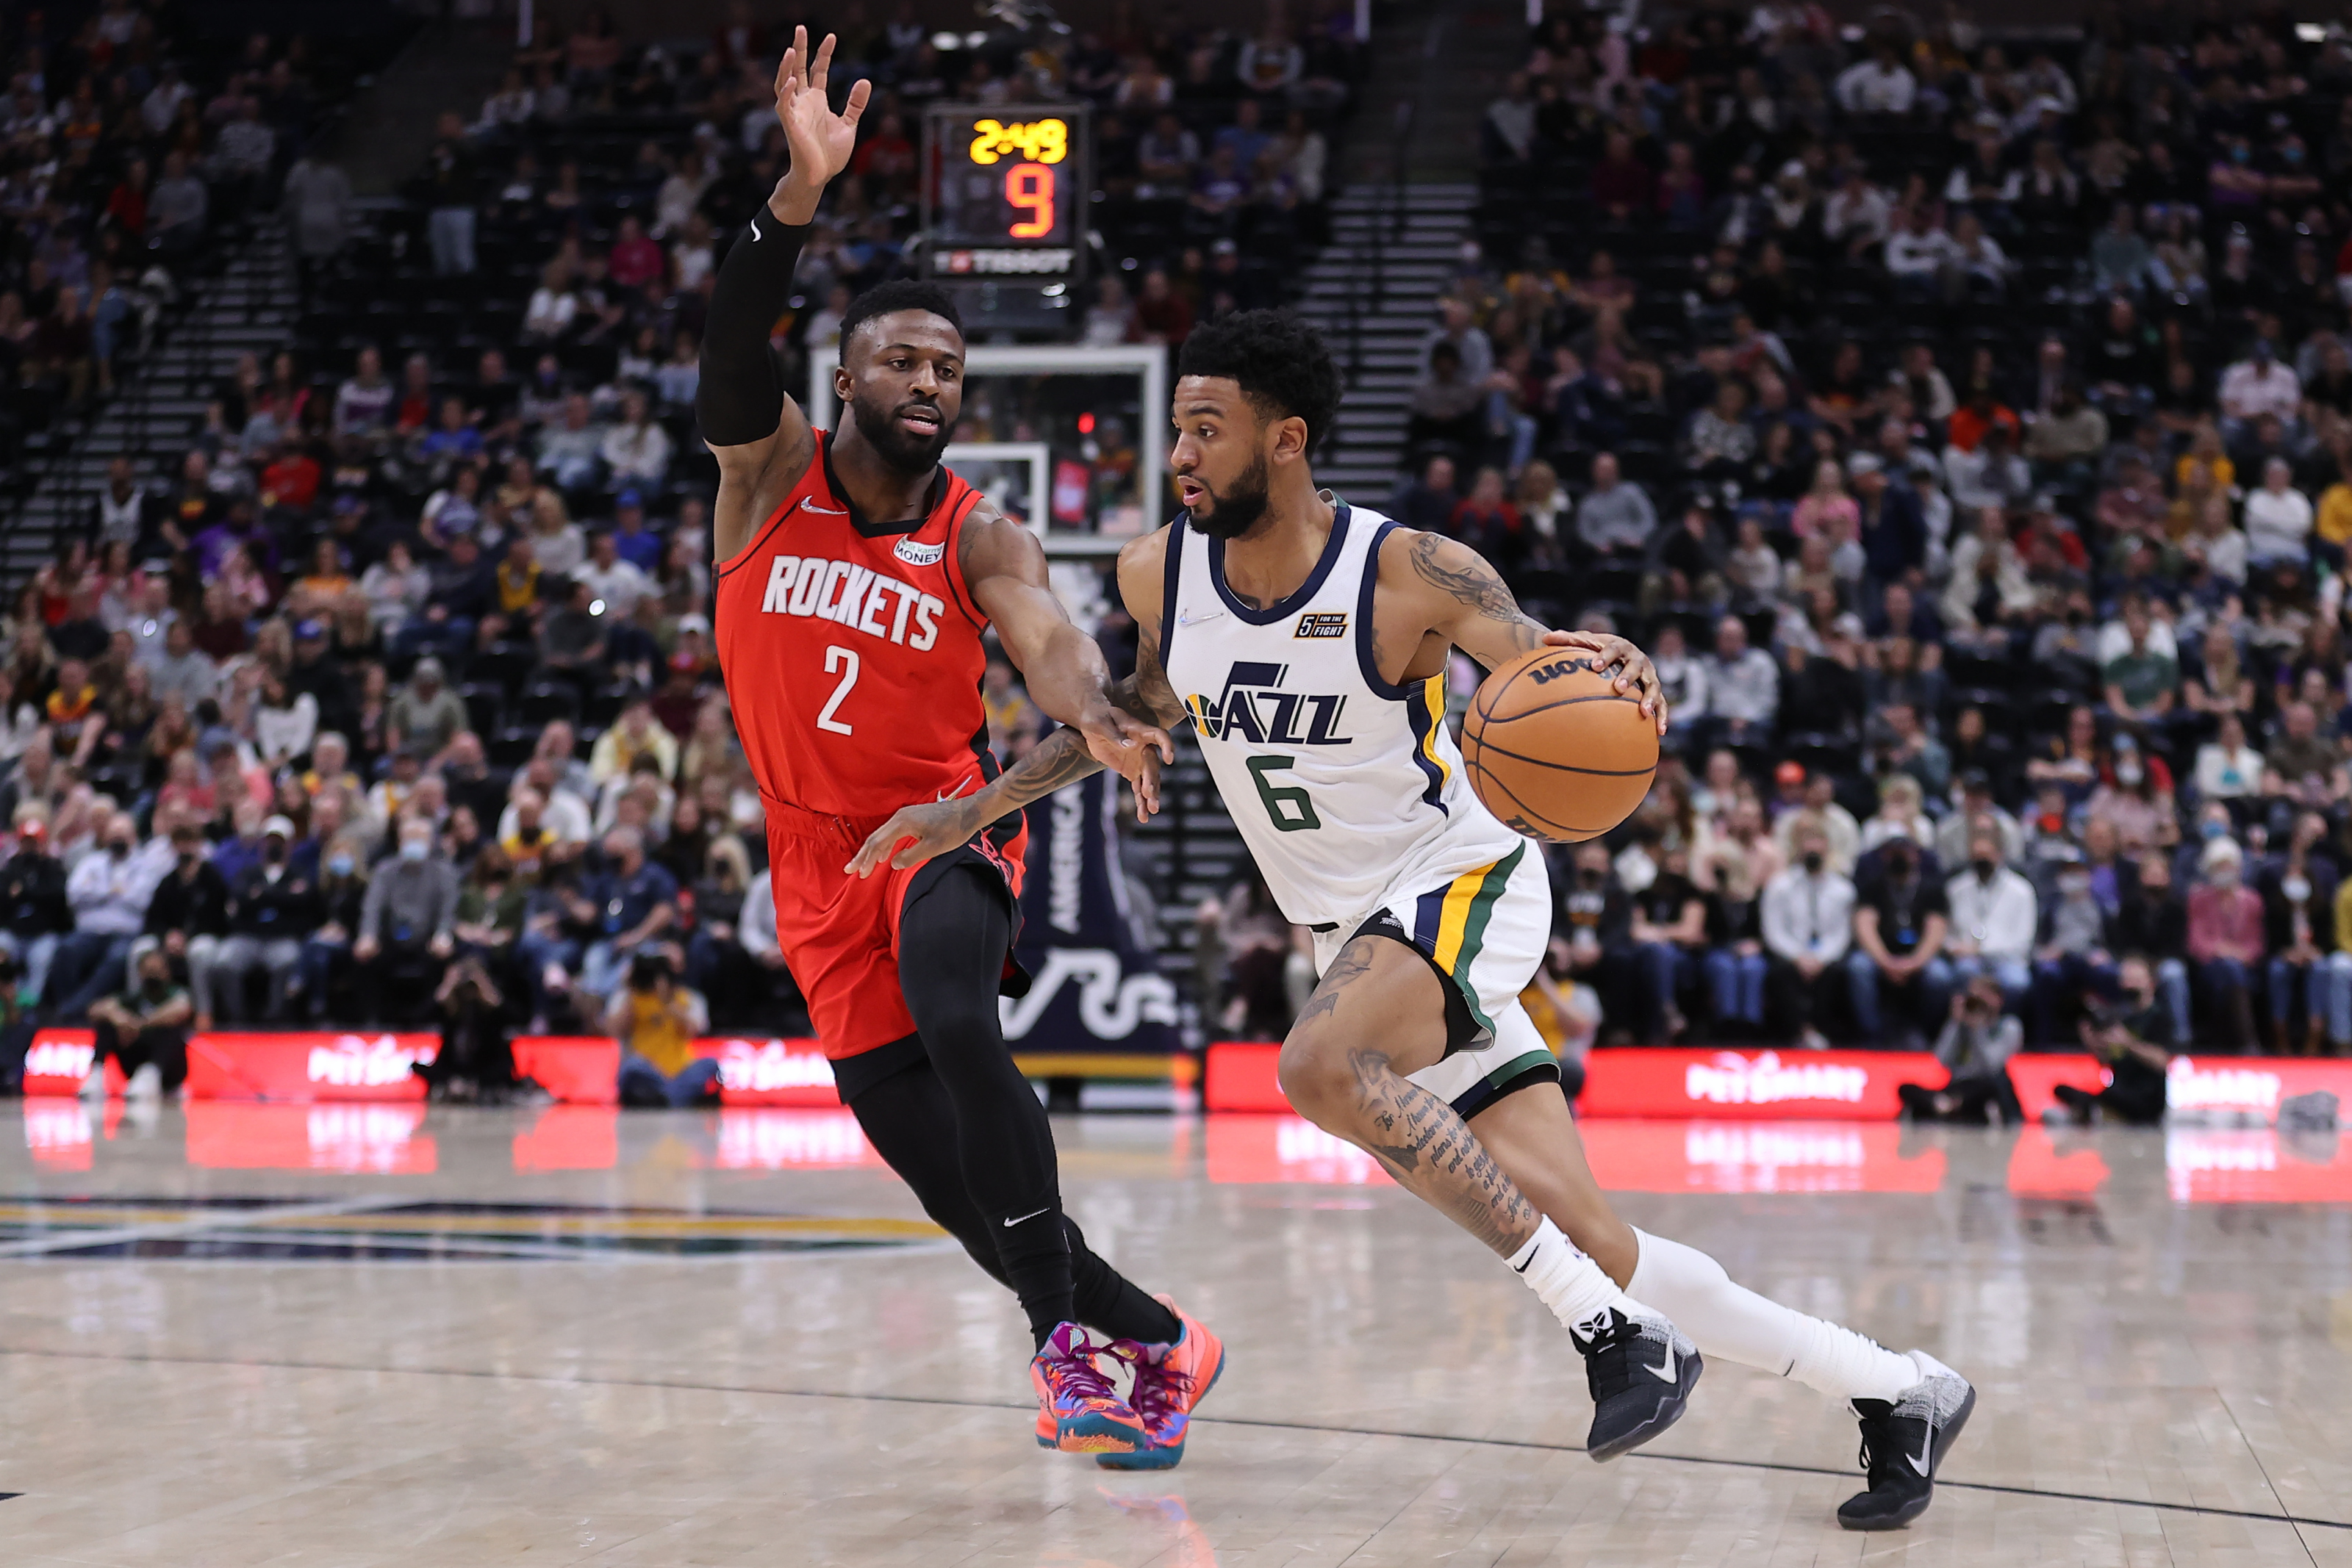 NBA Trade: What Are the Wolves Getting in Nickeil Alexander-Walker